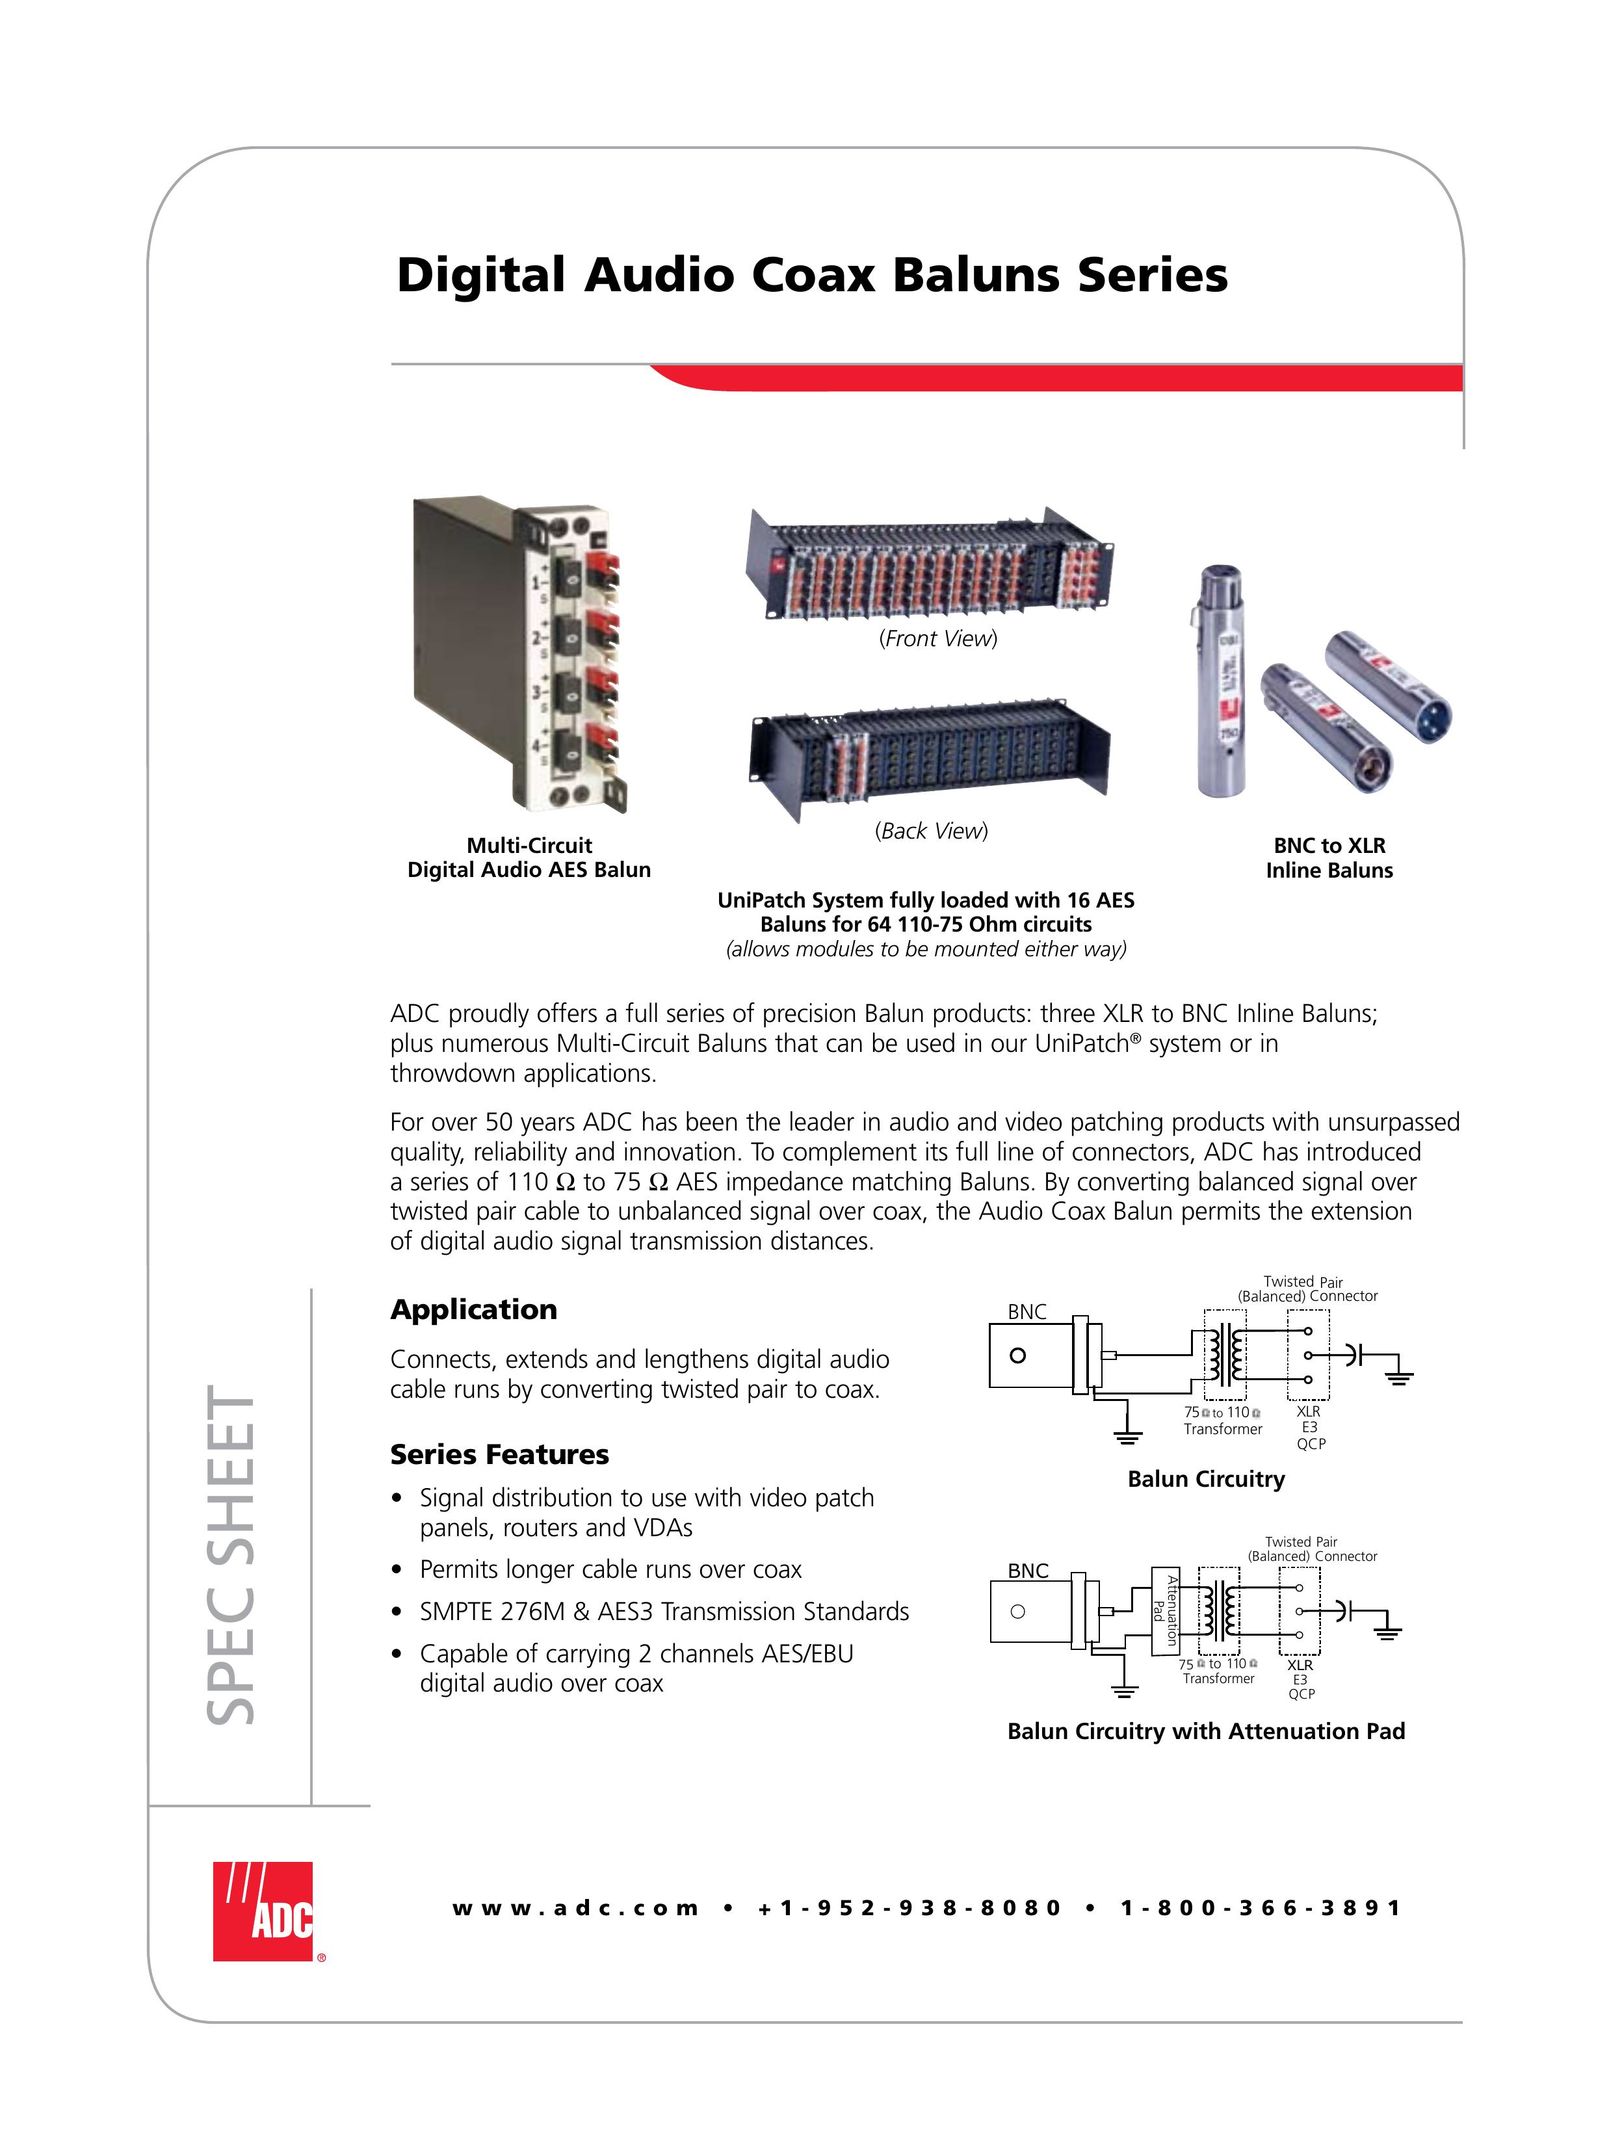 ADC Baluns Series Network Router User Manual